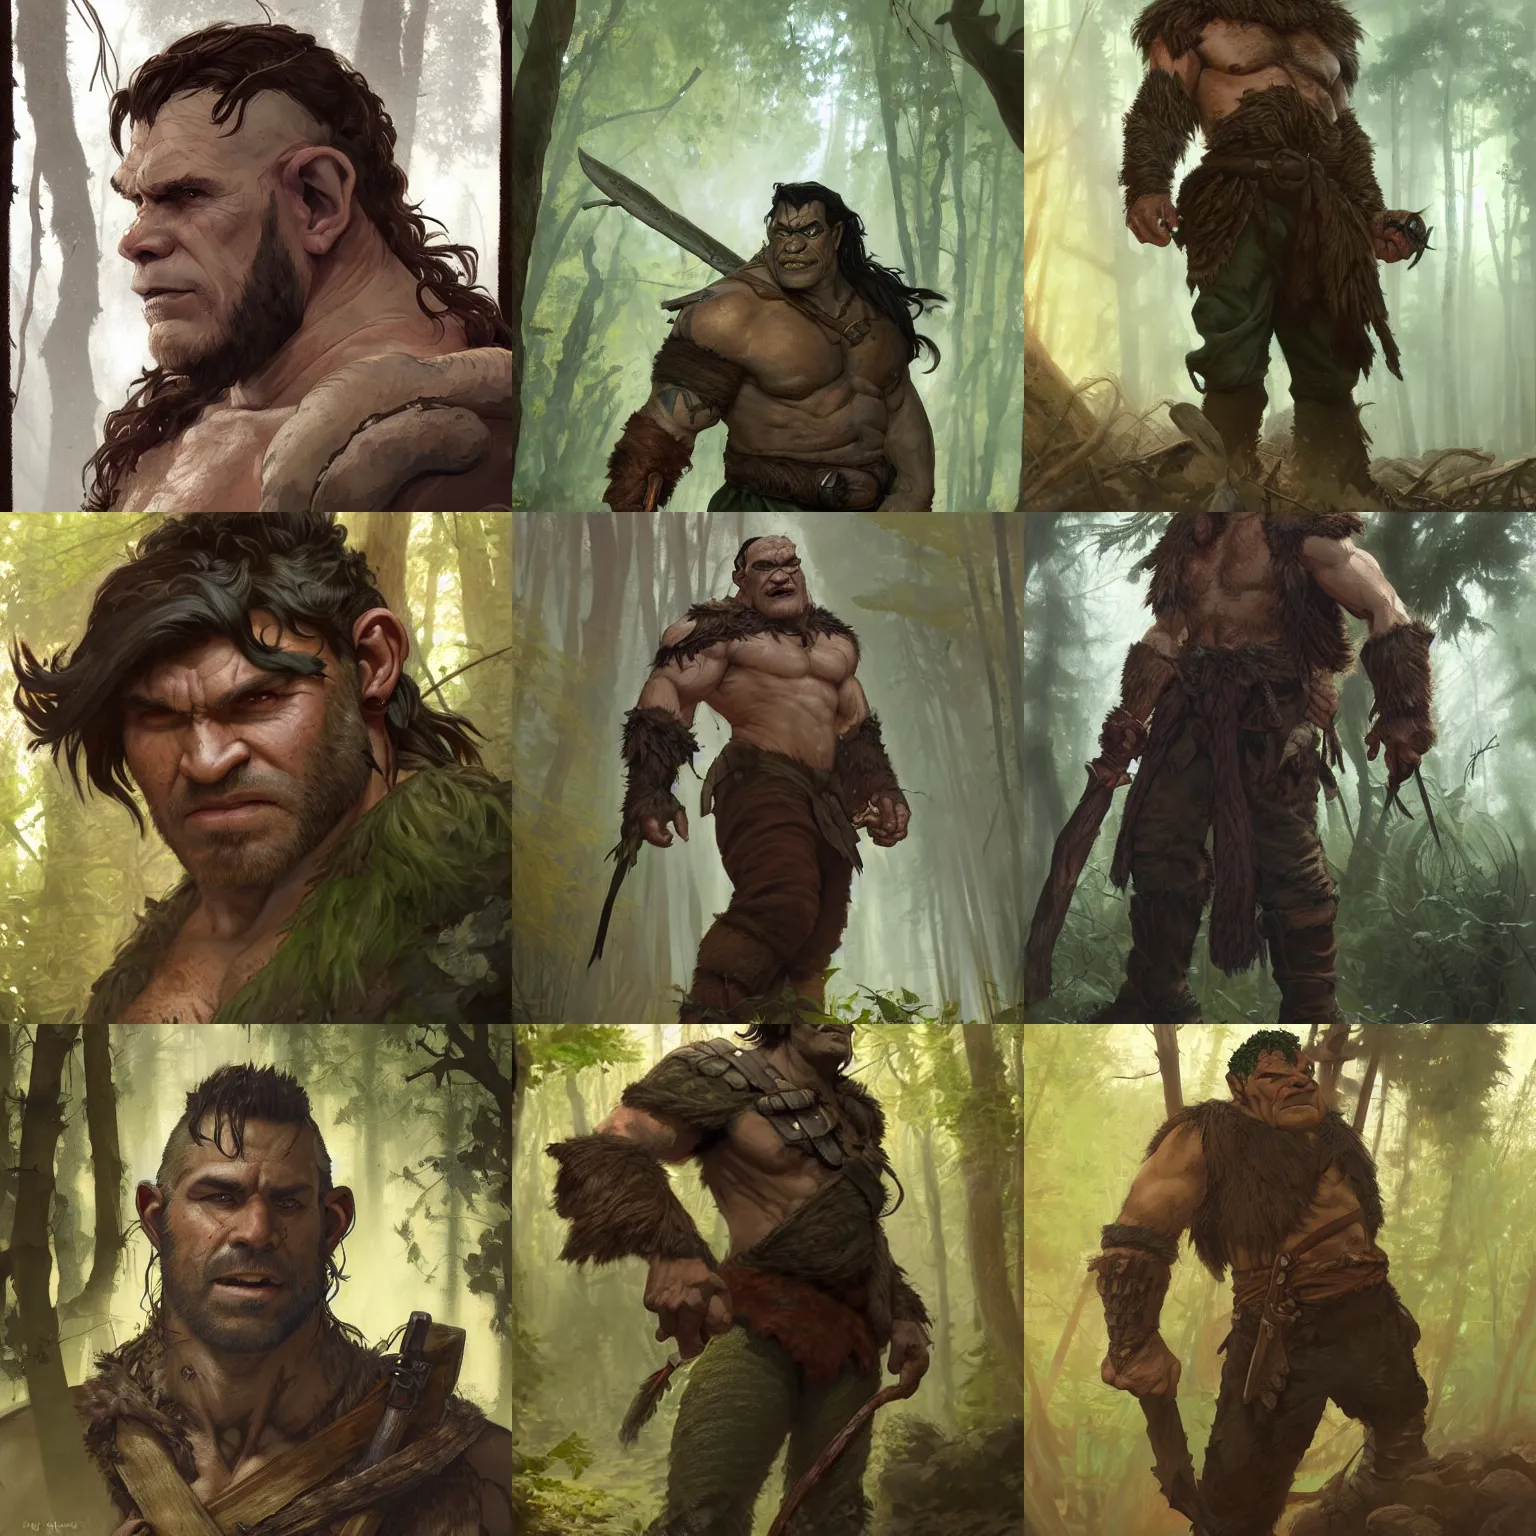 portrait of a ruggedly handsome half - orc fighter, Stable Diffusion